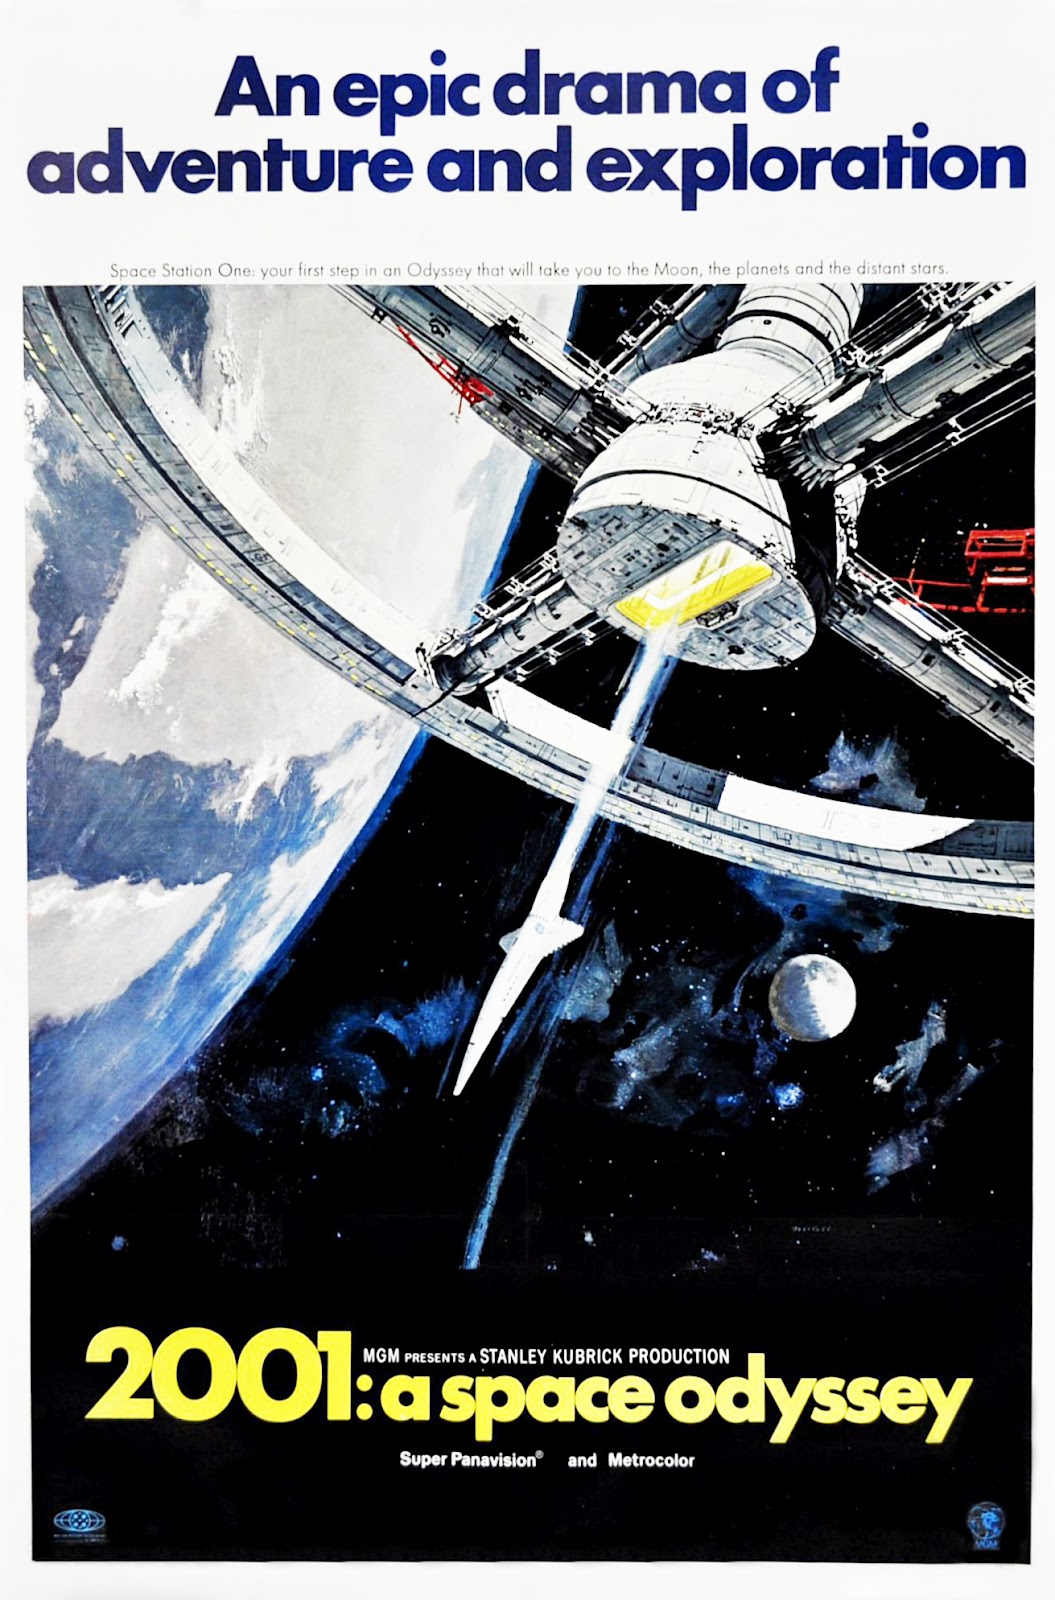 2001+A+Space+Odyssey+%281968%29+Space+Station+One+by+Robert+McCall.jpg